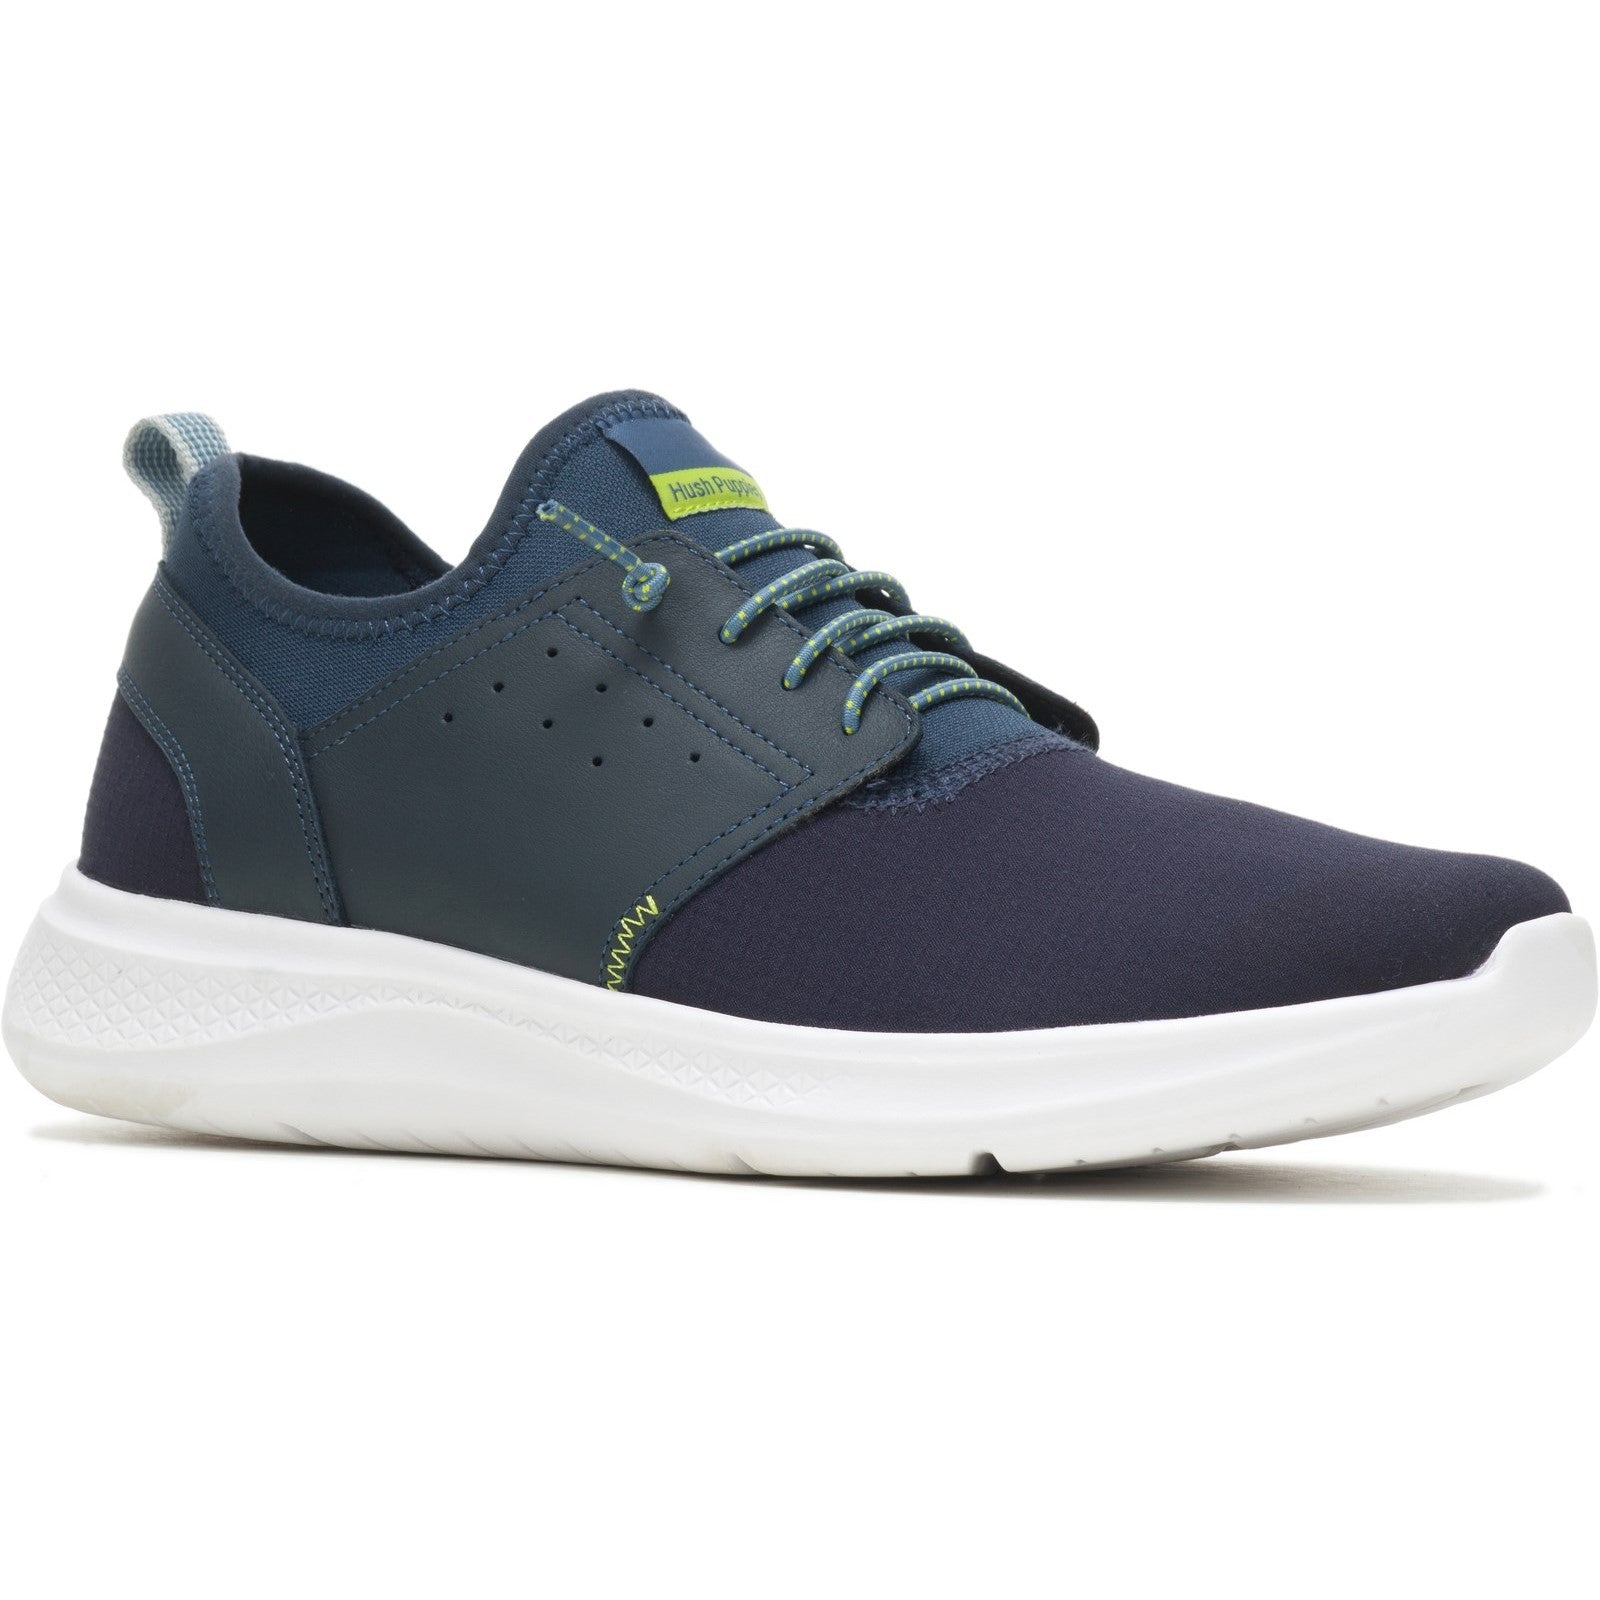 Mens Sports Navy Hush Puppies Elevate Bungee